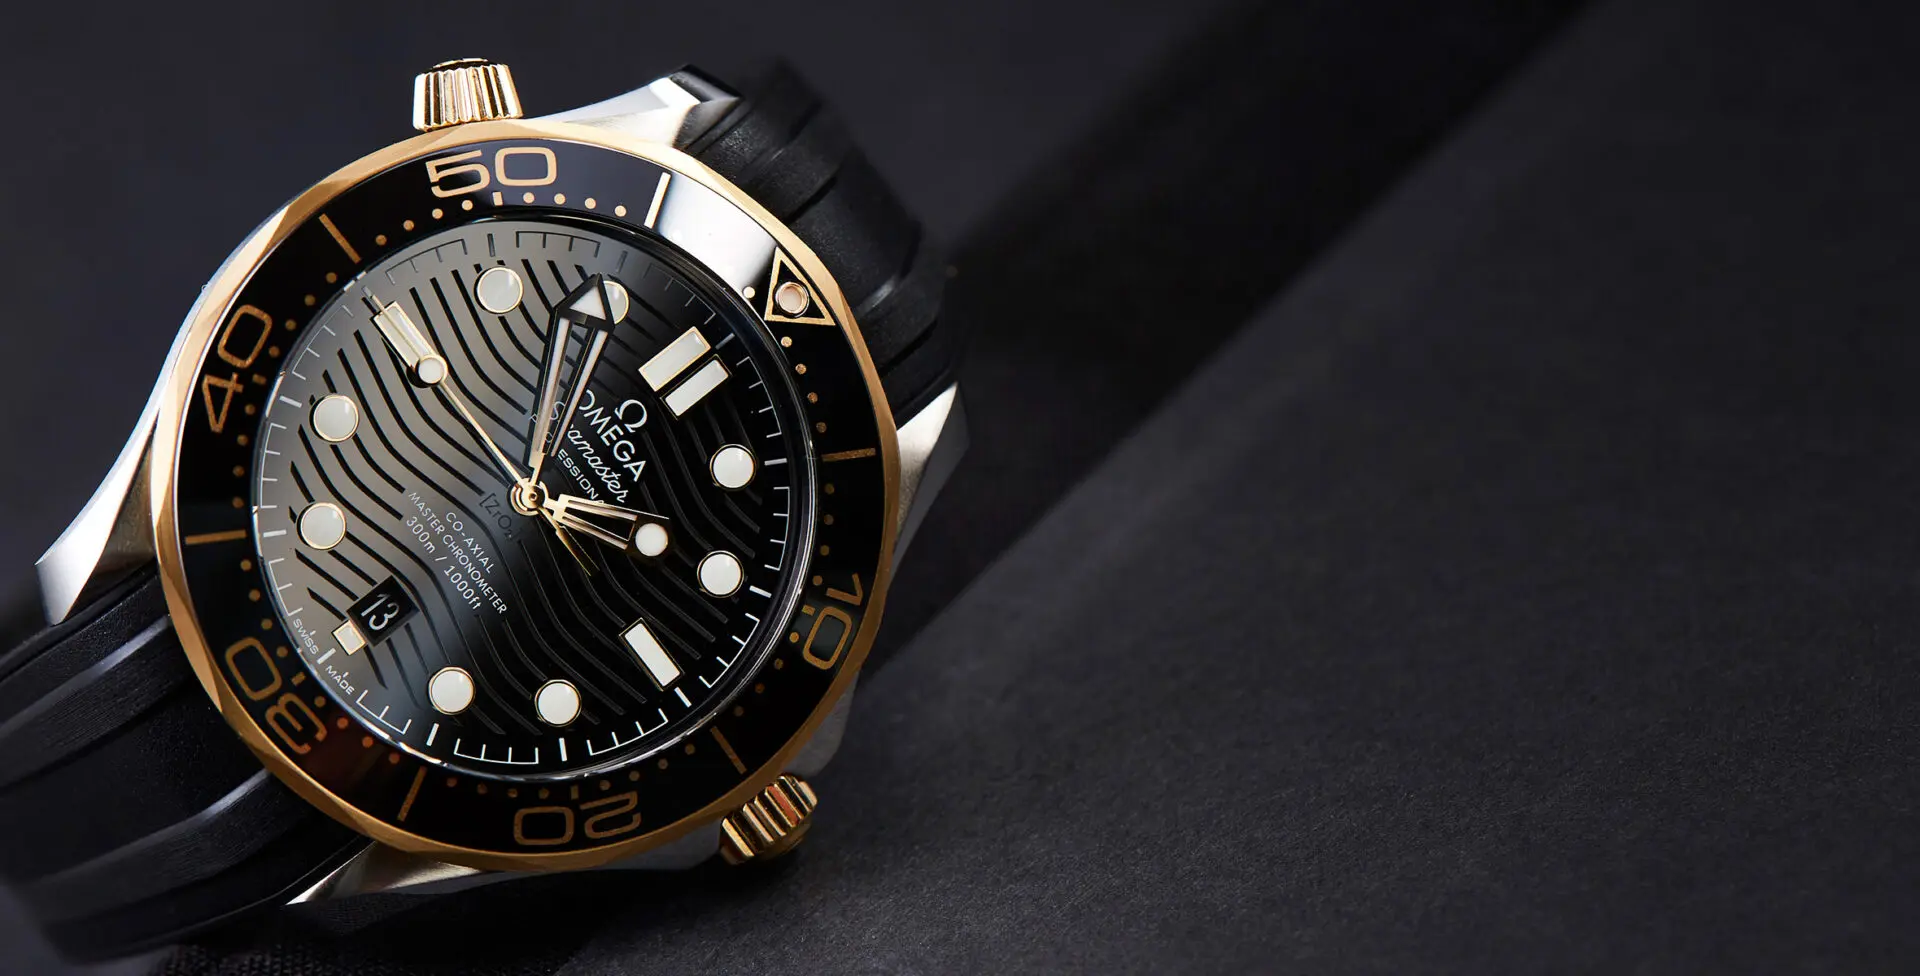 HANDS-ON: Seriously fun, the gold and steel Omega Seamaster 300M Diver -  Time and Tide Watches